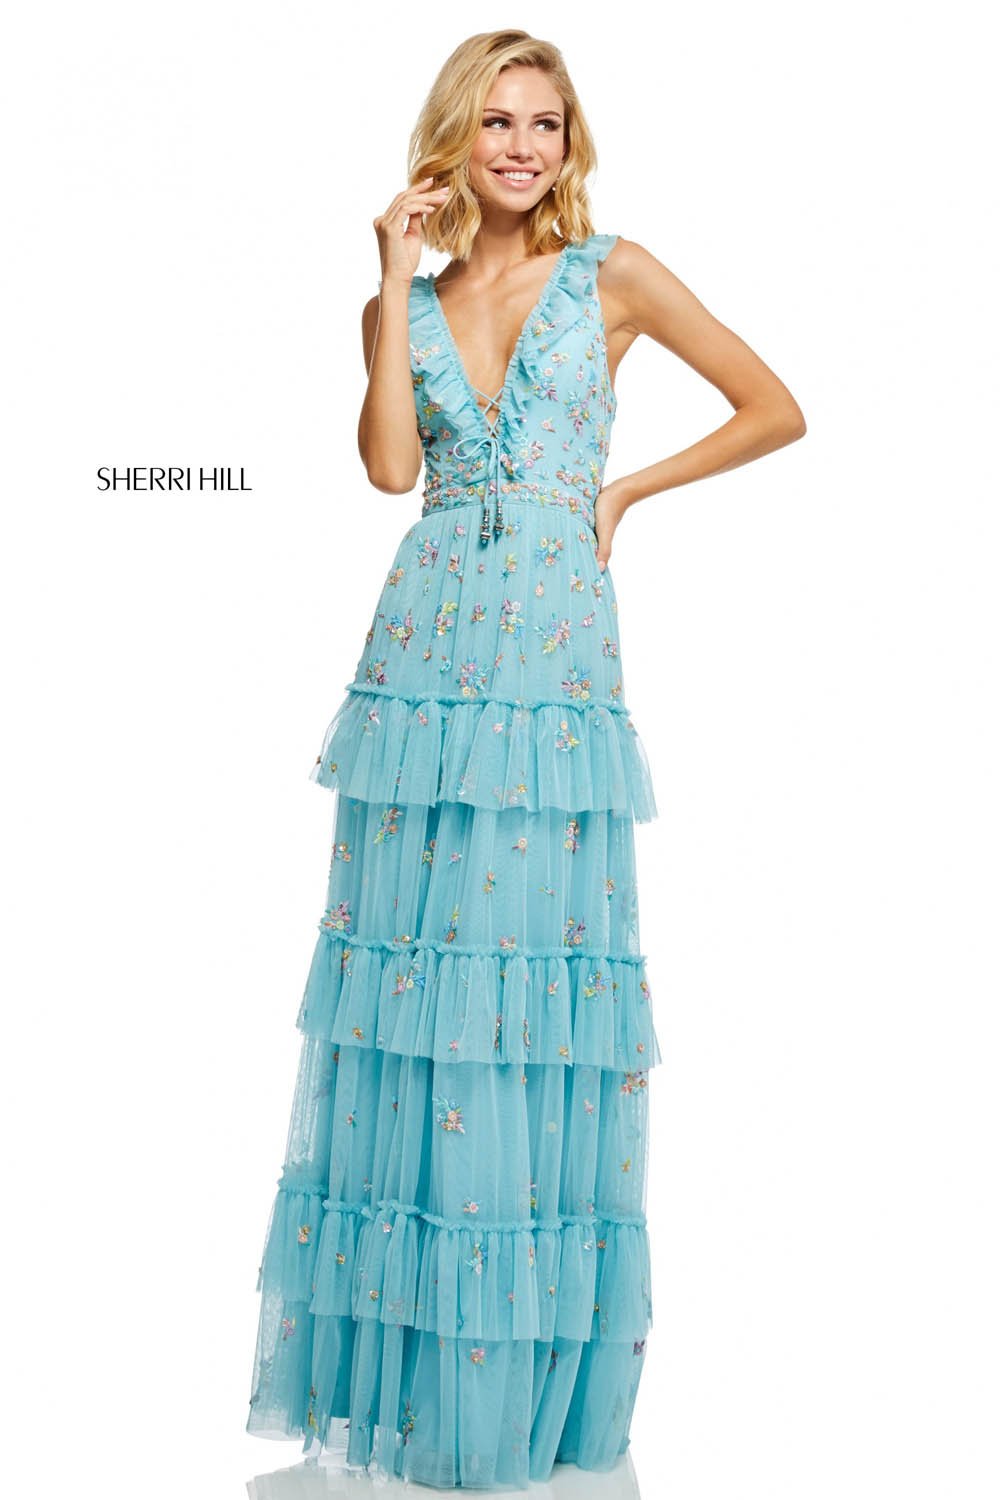 Sherri Hill 52884 dress images in these colors: Light Blue, Black, Coral, Yellow.